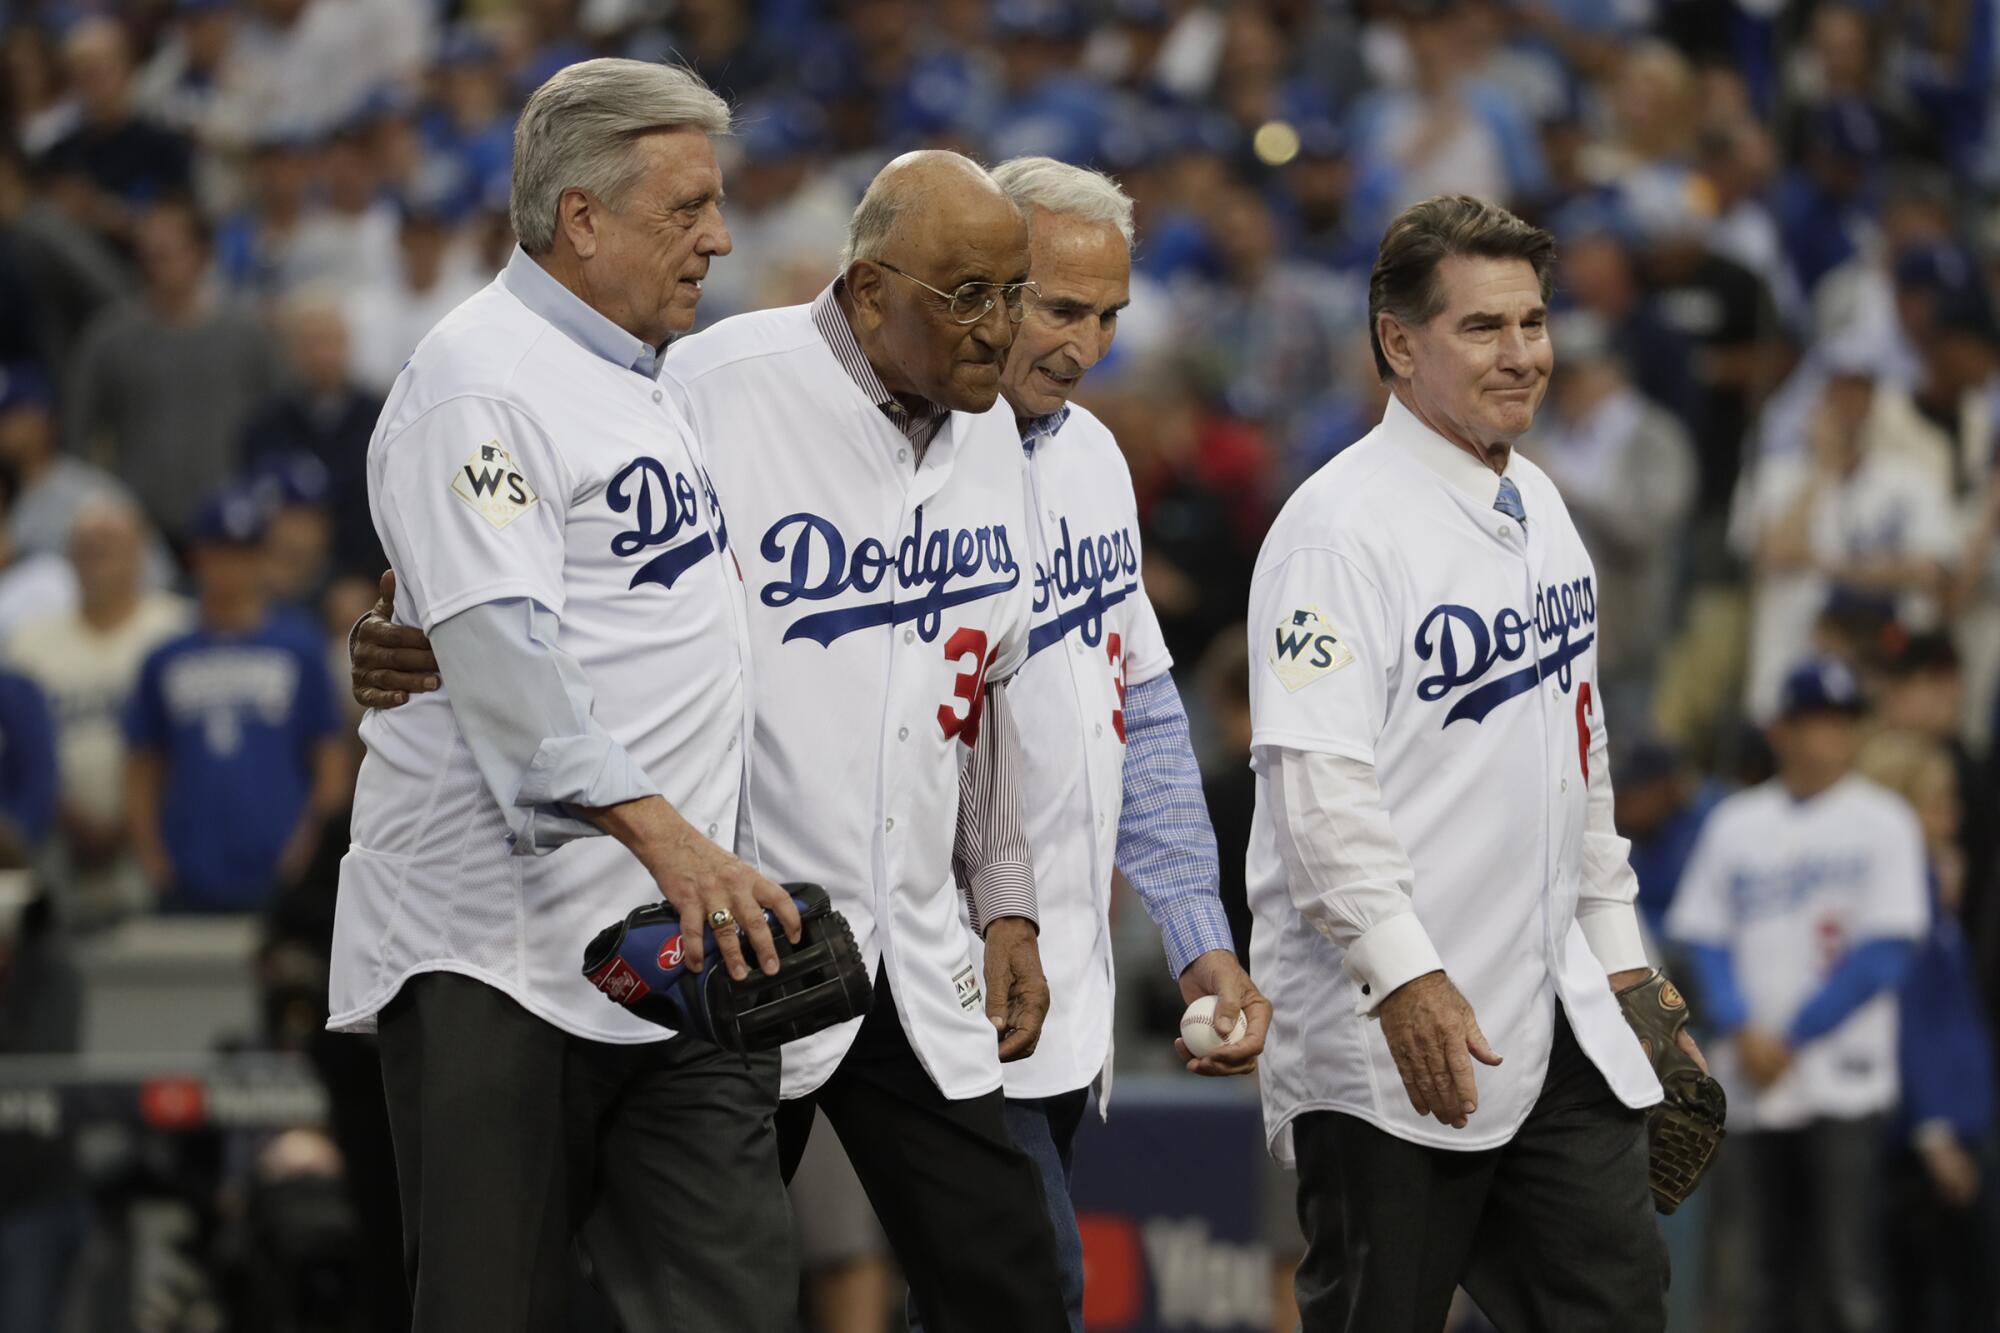 Legendary Dodgers walk off the field after the ceremonial first pitch in game seven of the World Series at Dodger Stadium.